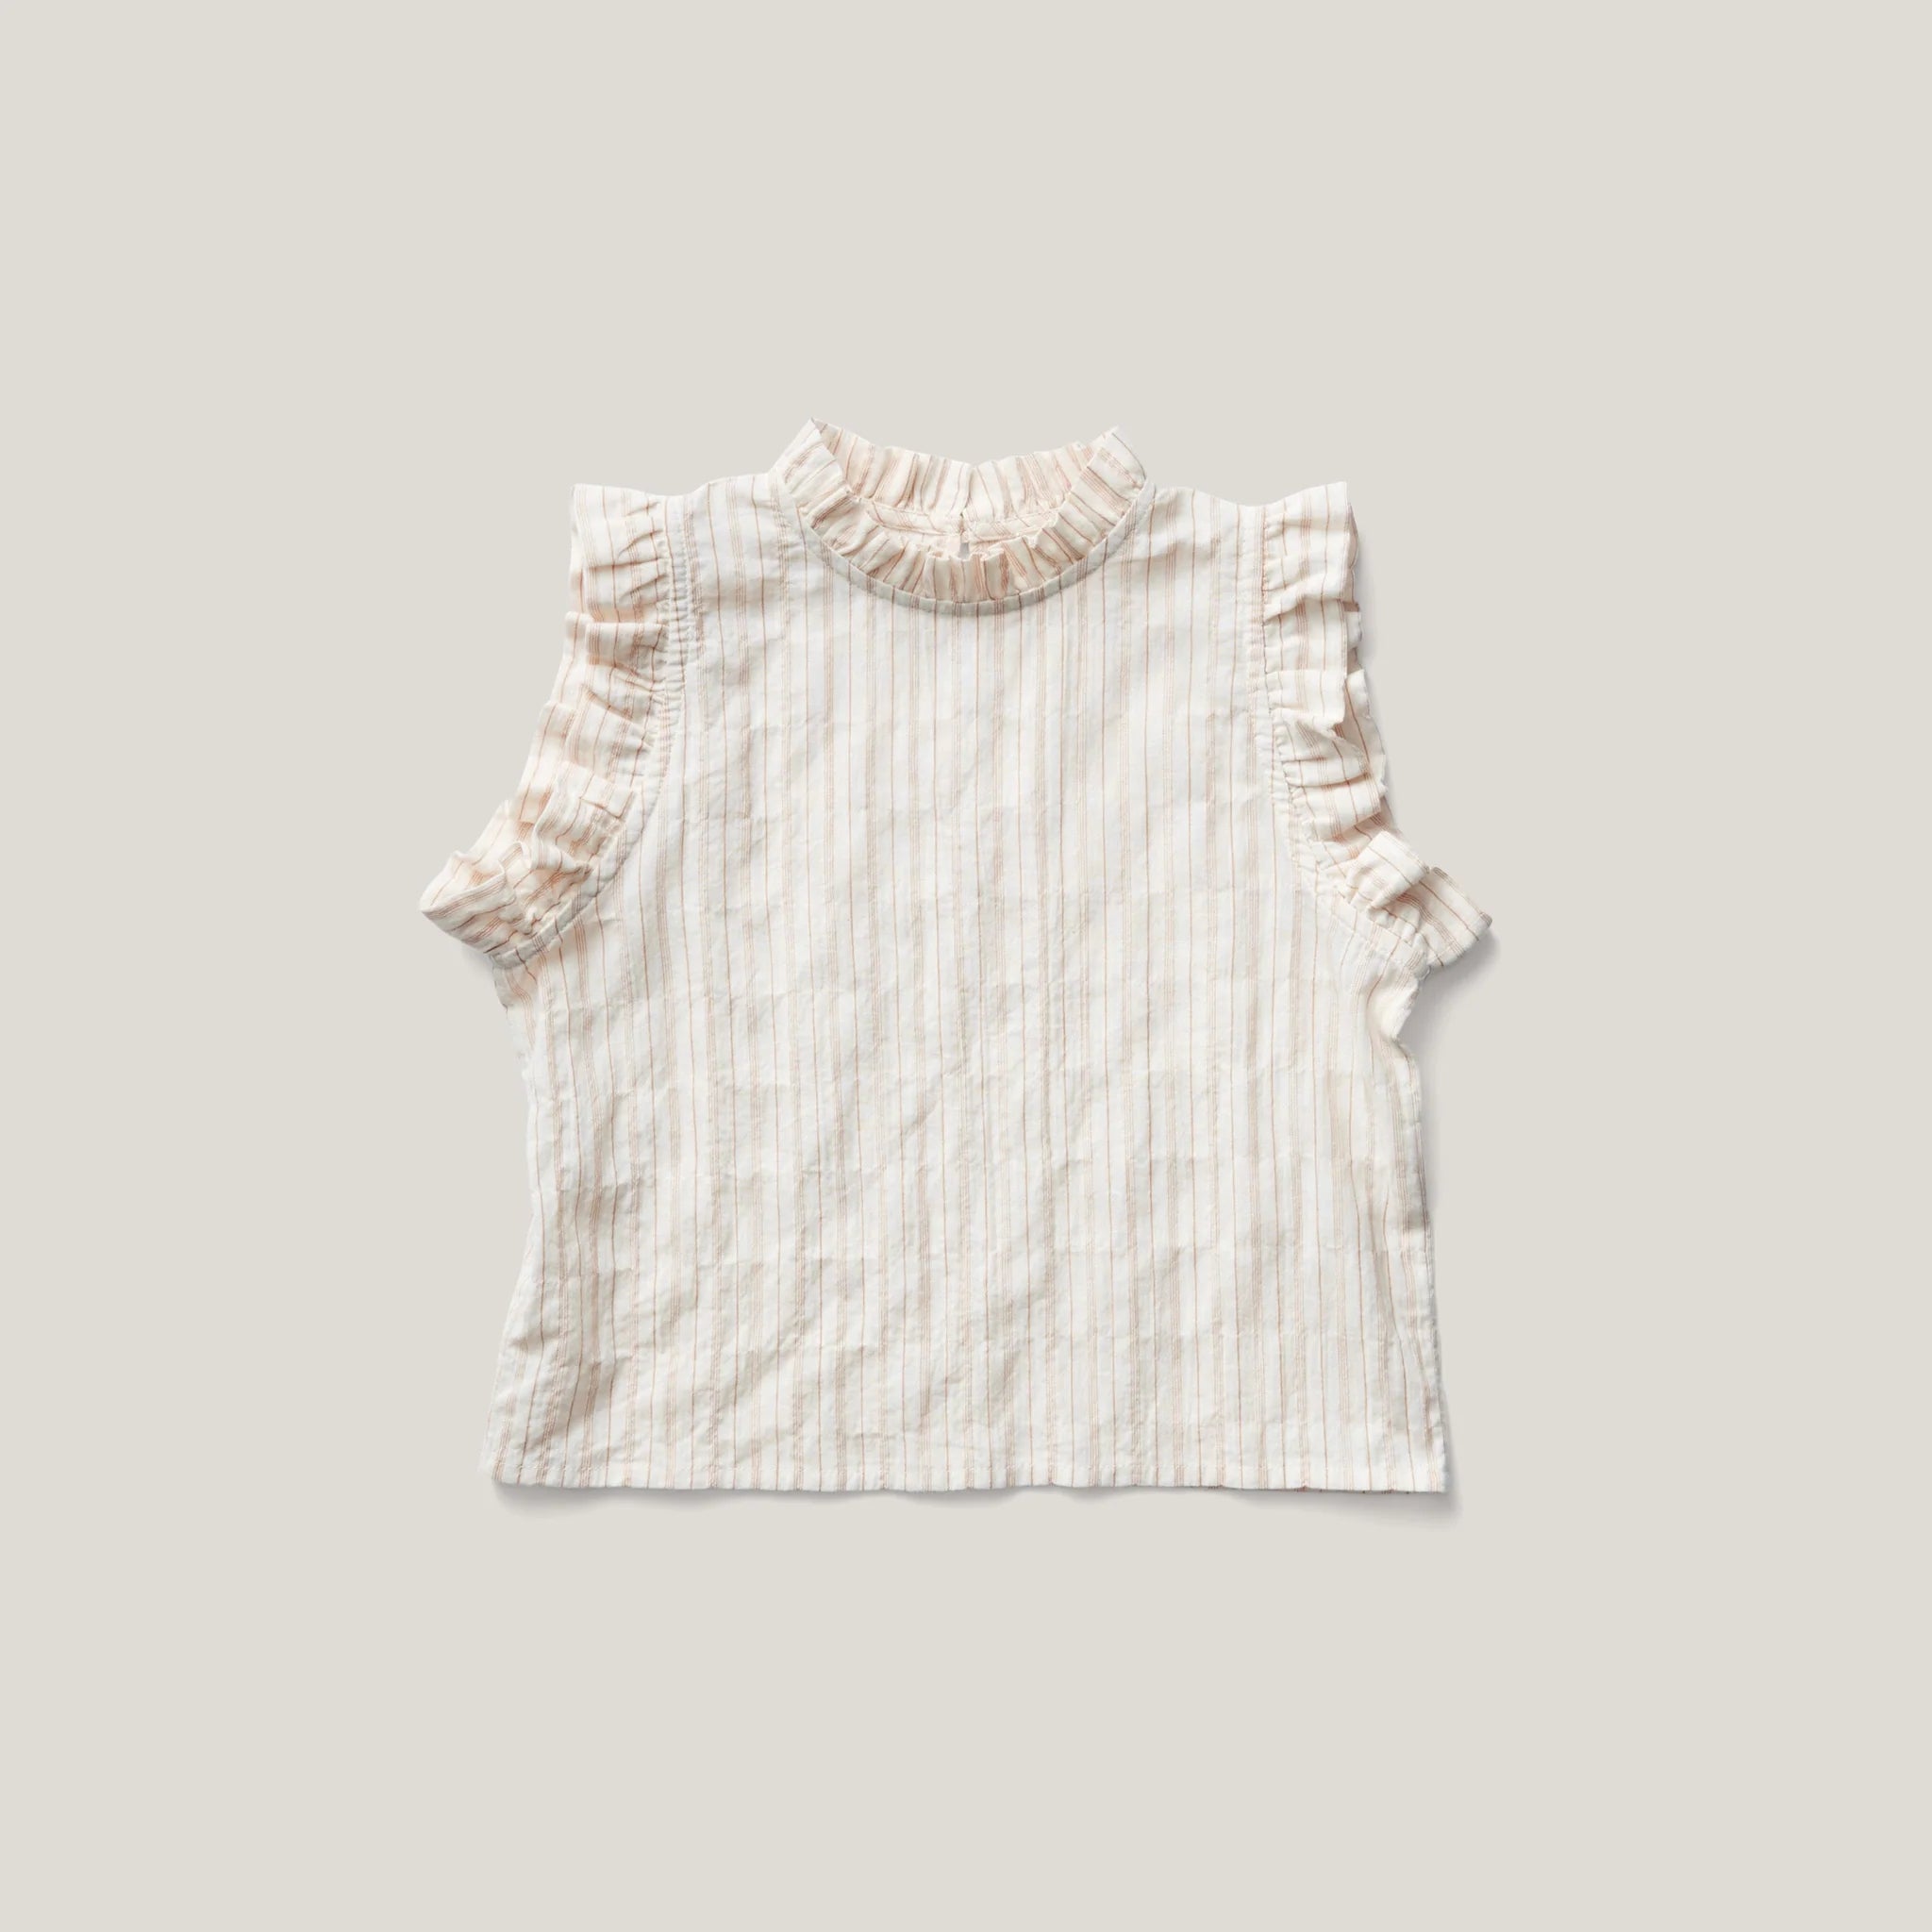 Soor Ploom, Thelma Camisole in Chalk Stripe – CouCou